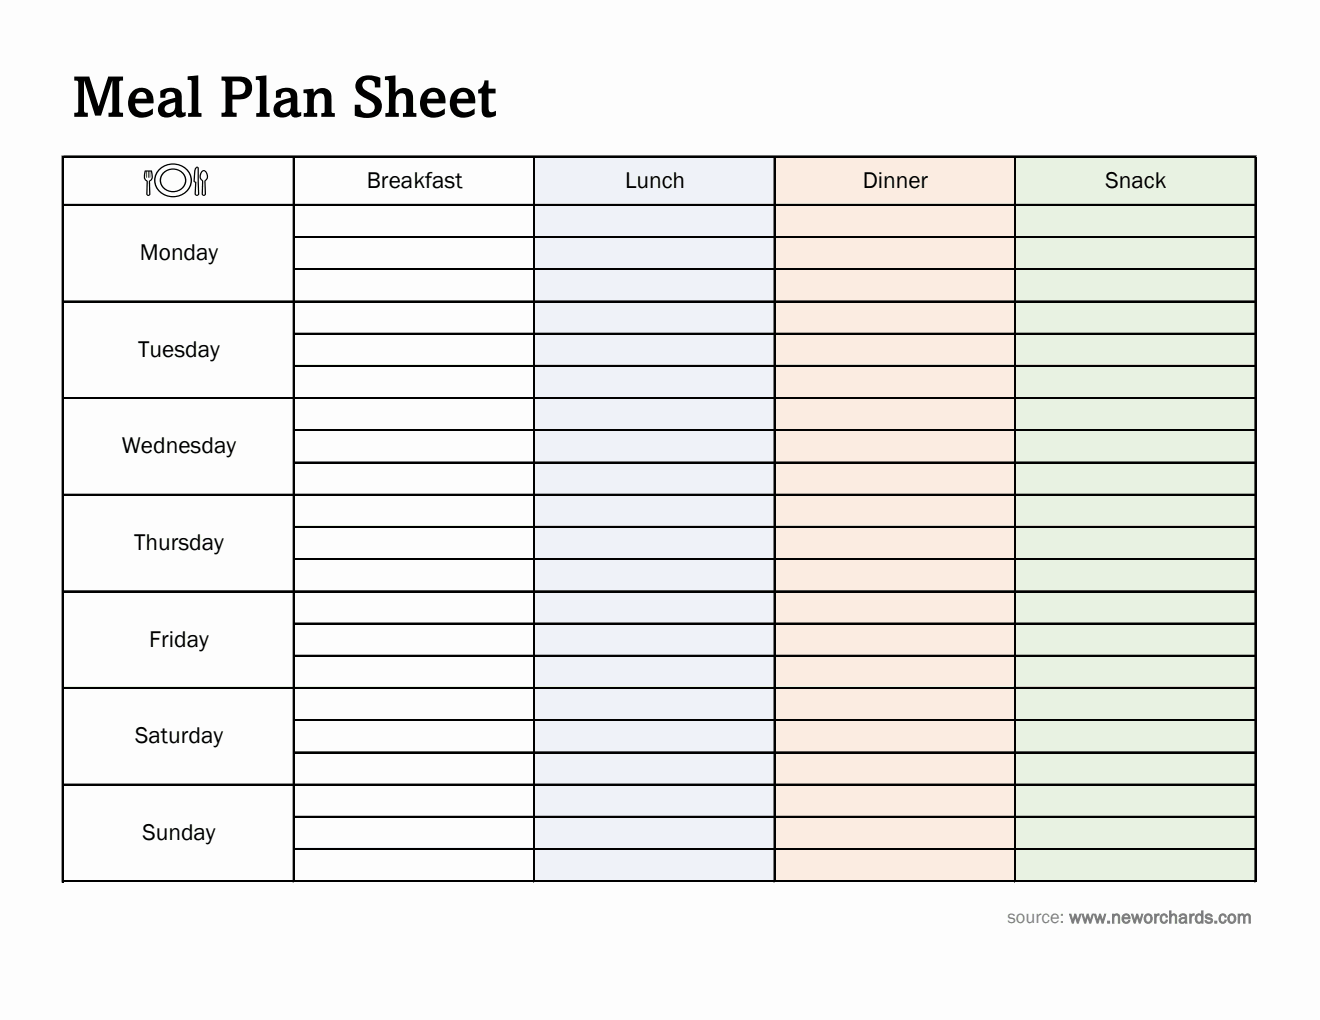 Free Downloadable Meal Plan Sheet in Excel Format